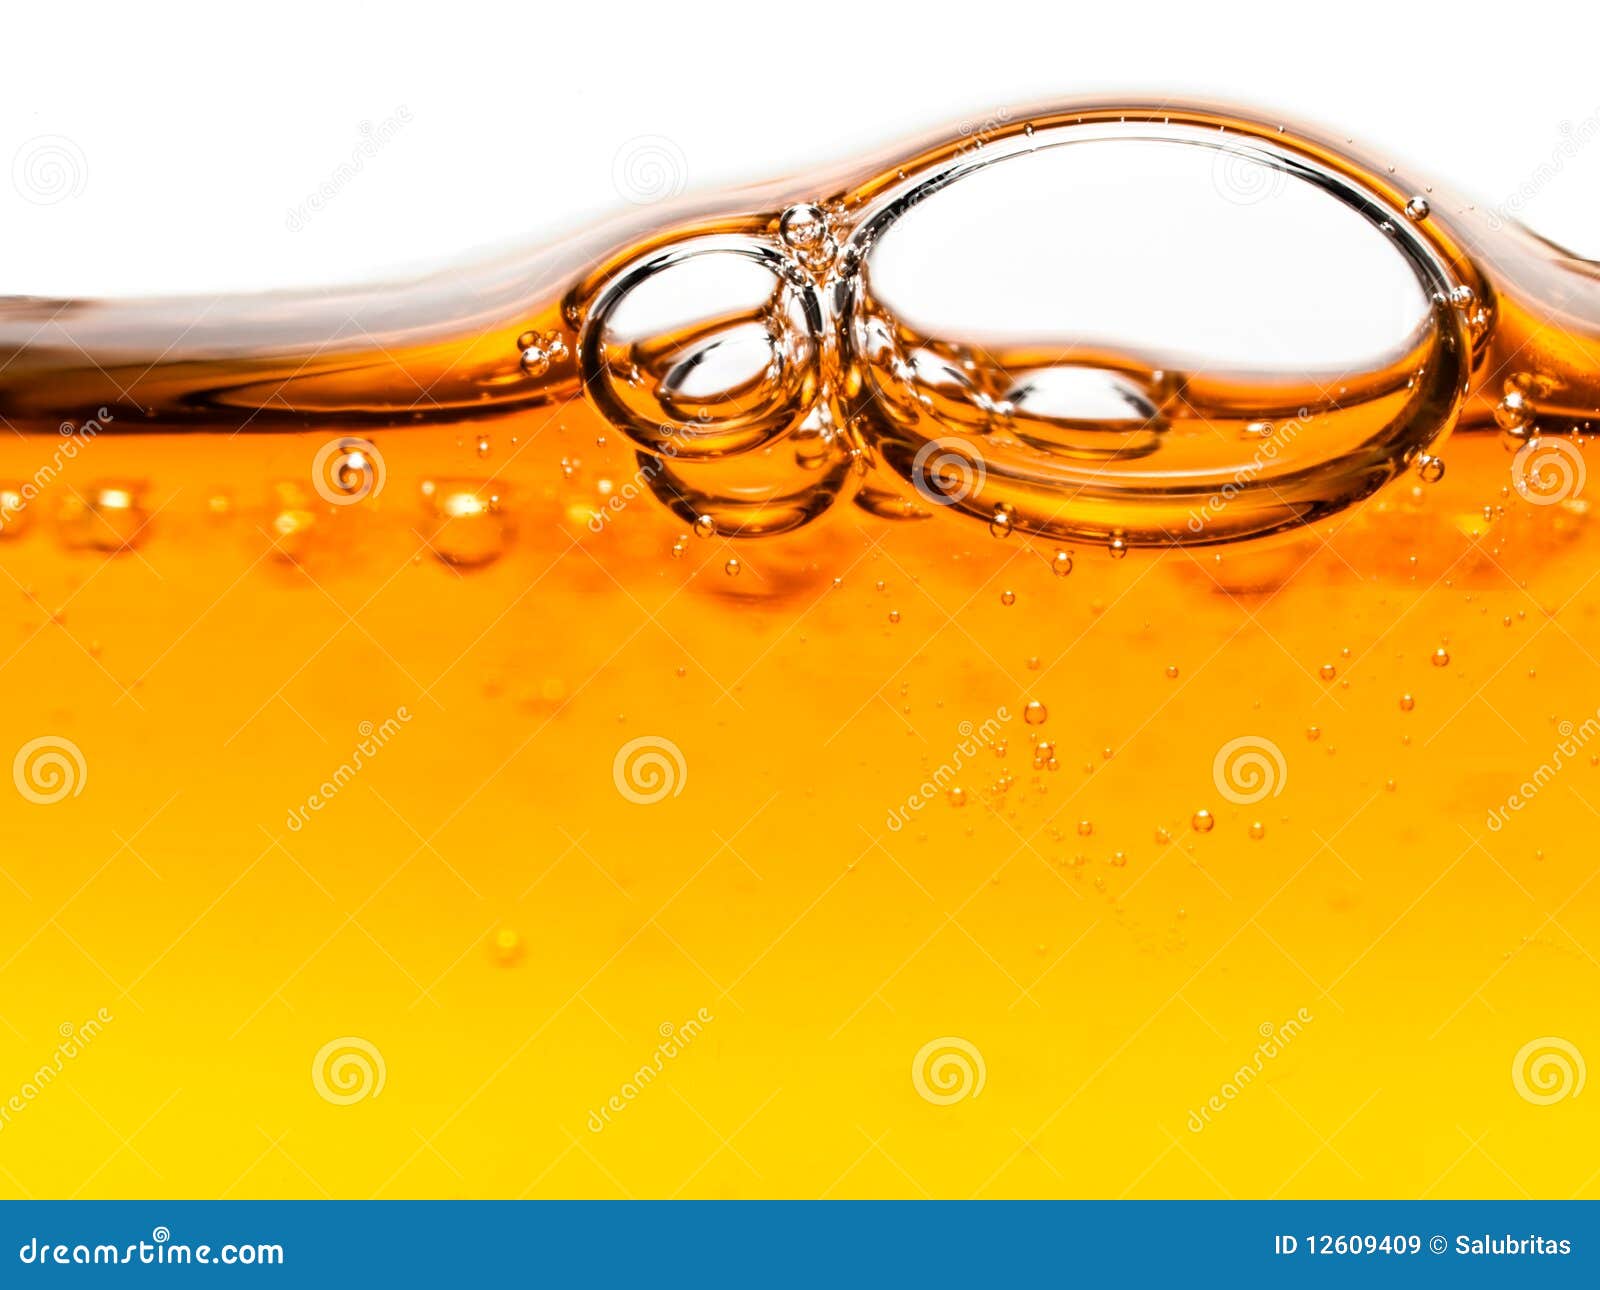 Download 174 577 Orange Liquid Photos Free Royalty Free Stock Photos From Dreamstime Yellowimages Mockups